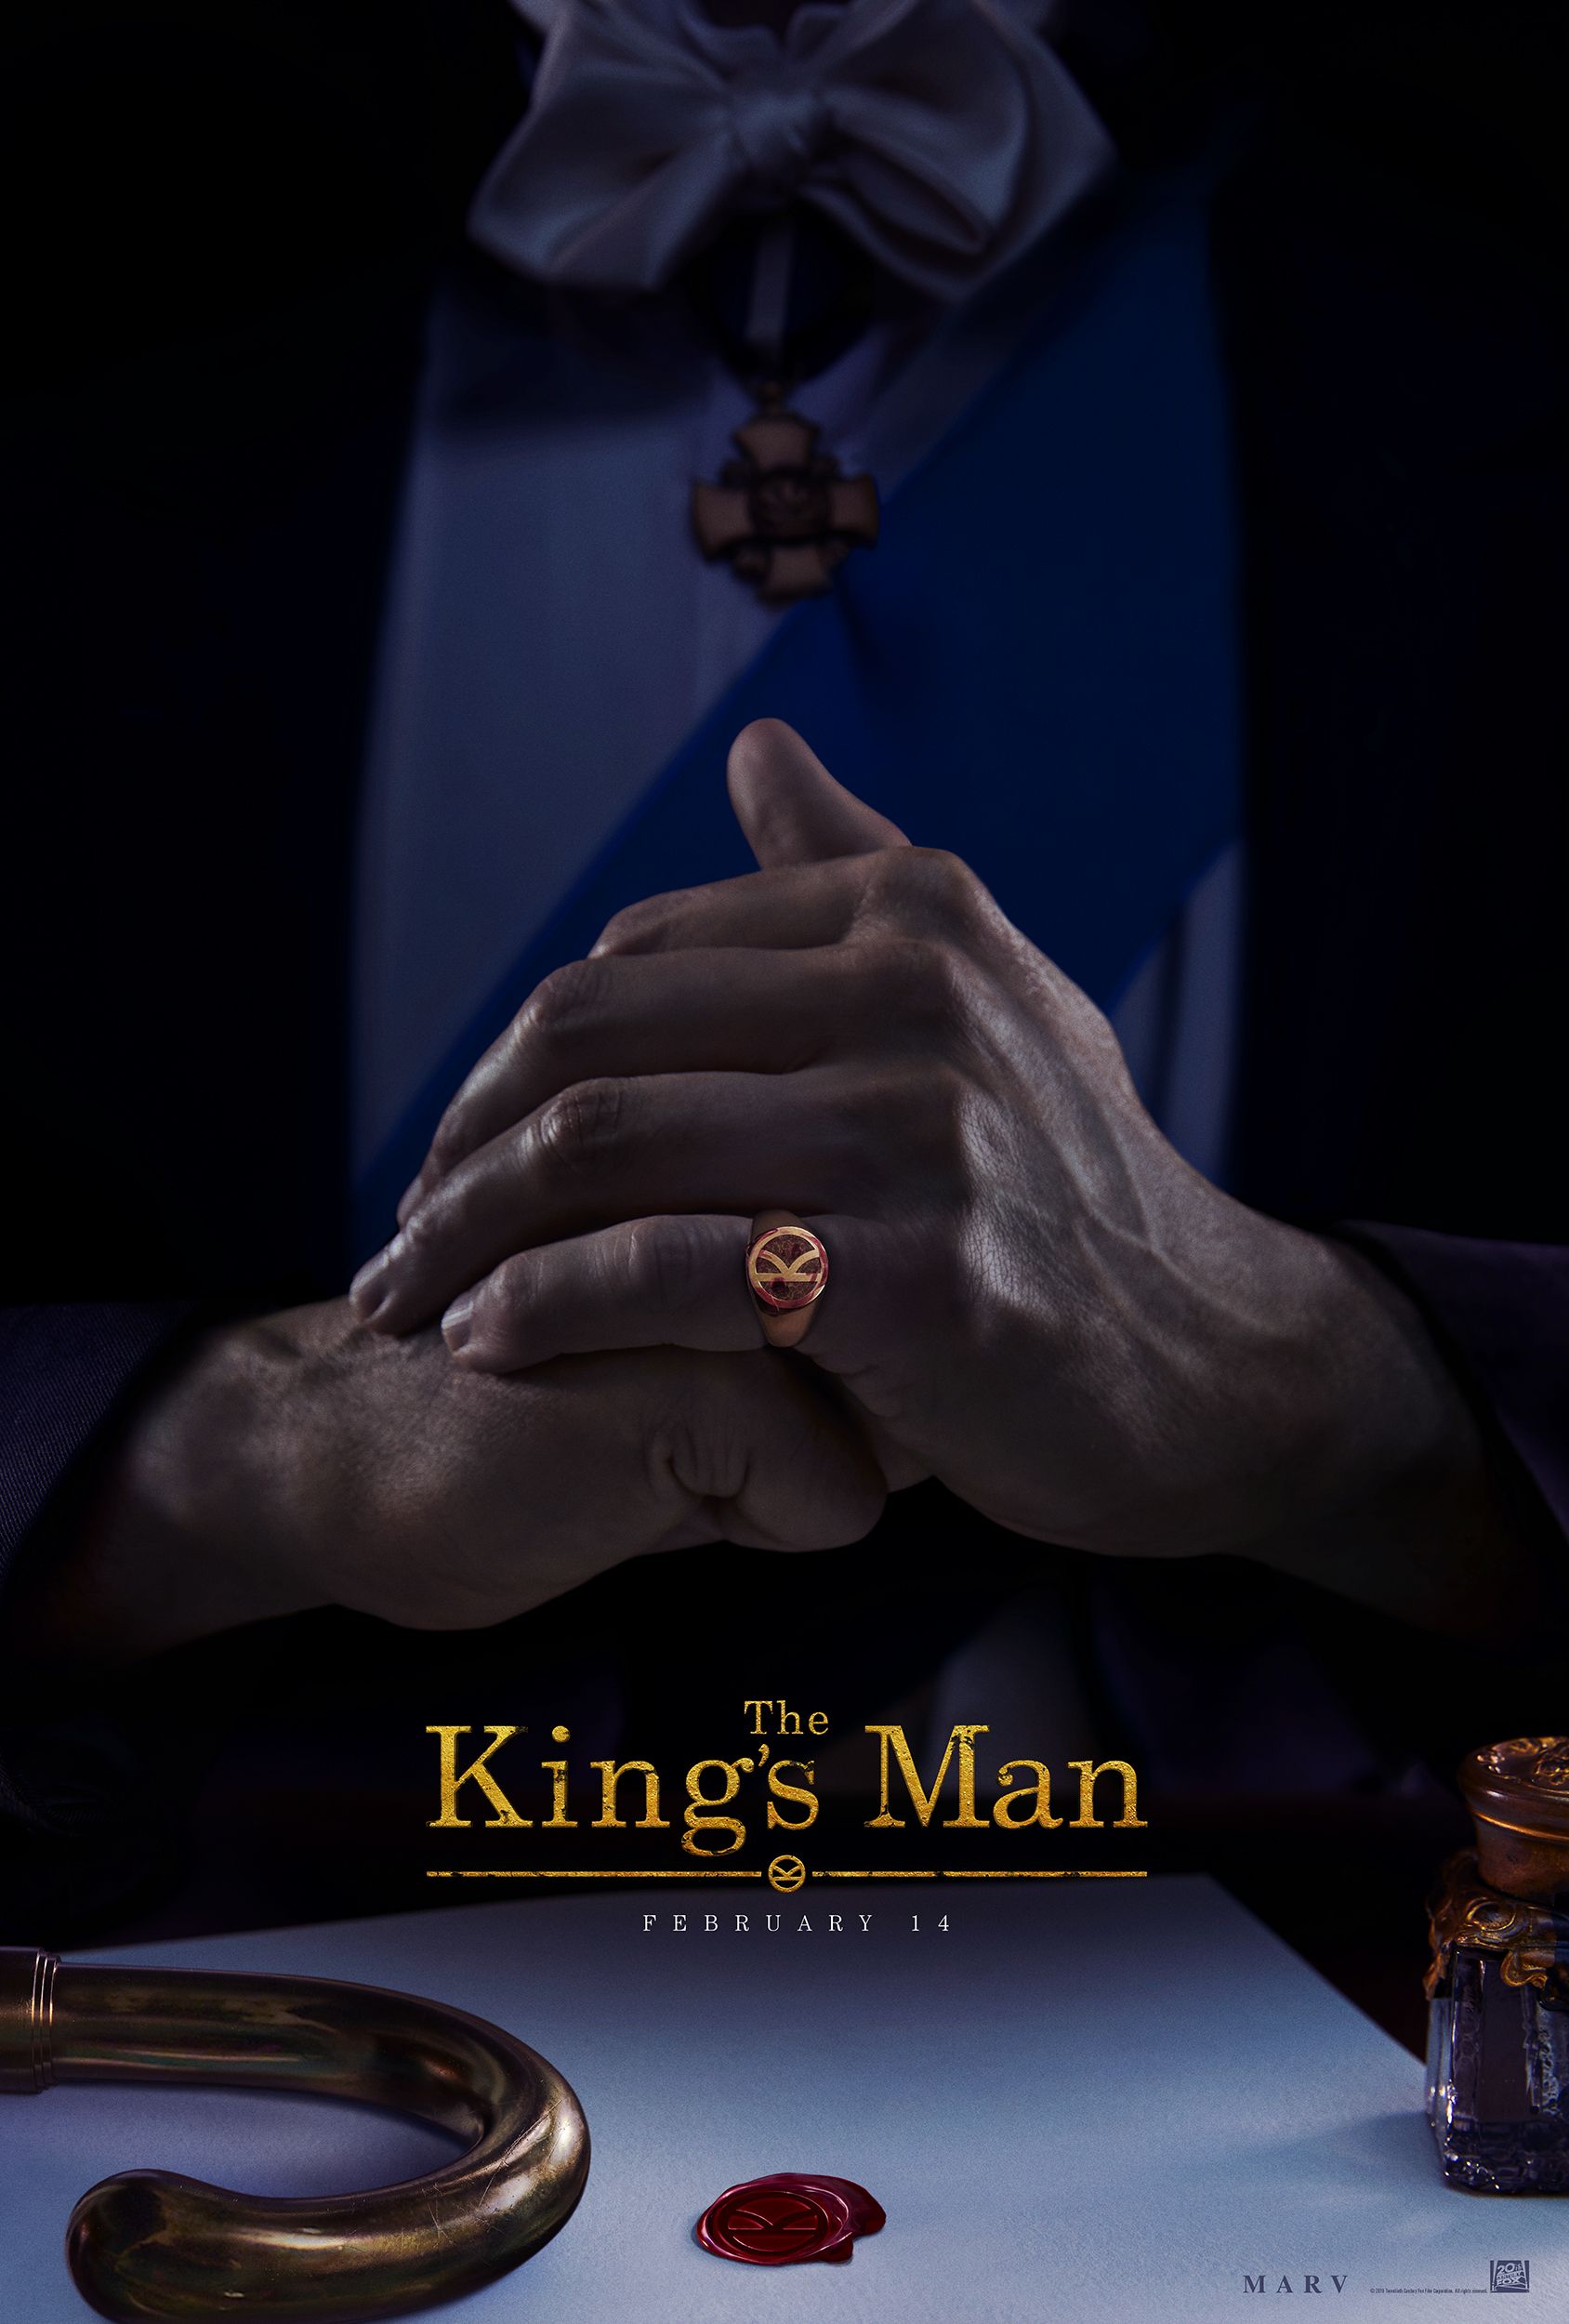 Kingsman Prequel Trailer and Poster Reveal WWI-Set The King's Man | Collider1688 x 2500